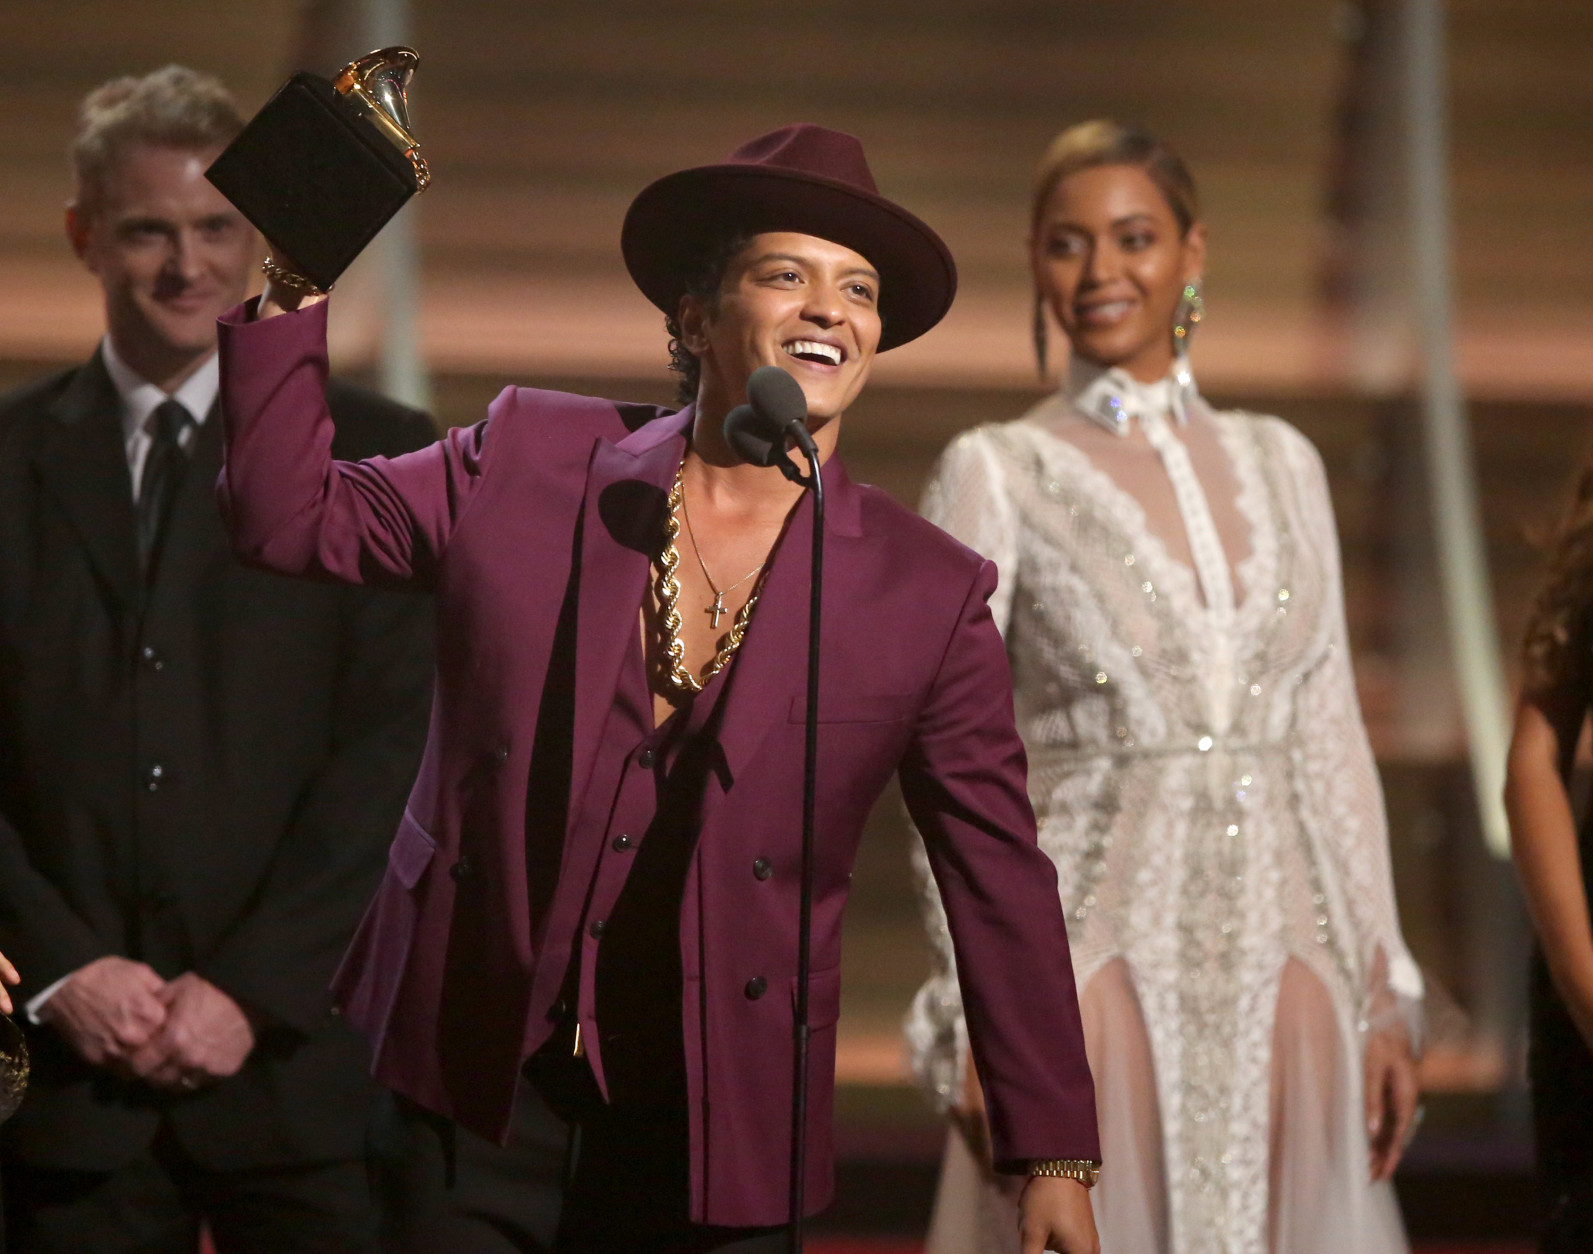 Bruno Mars accept the award for record of the year for Uptown Funk at the 58th annual Grammy Awards on Monday, Feb. 15, 2016, in Los Angeles. (Photo by Matt Sayles/Invision/AP)